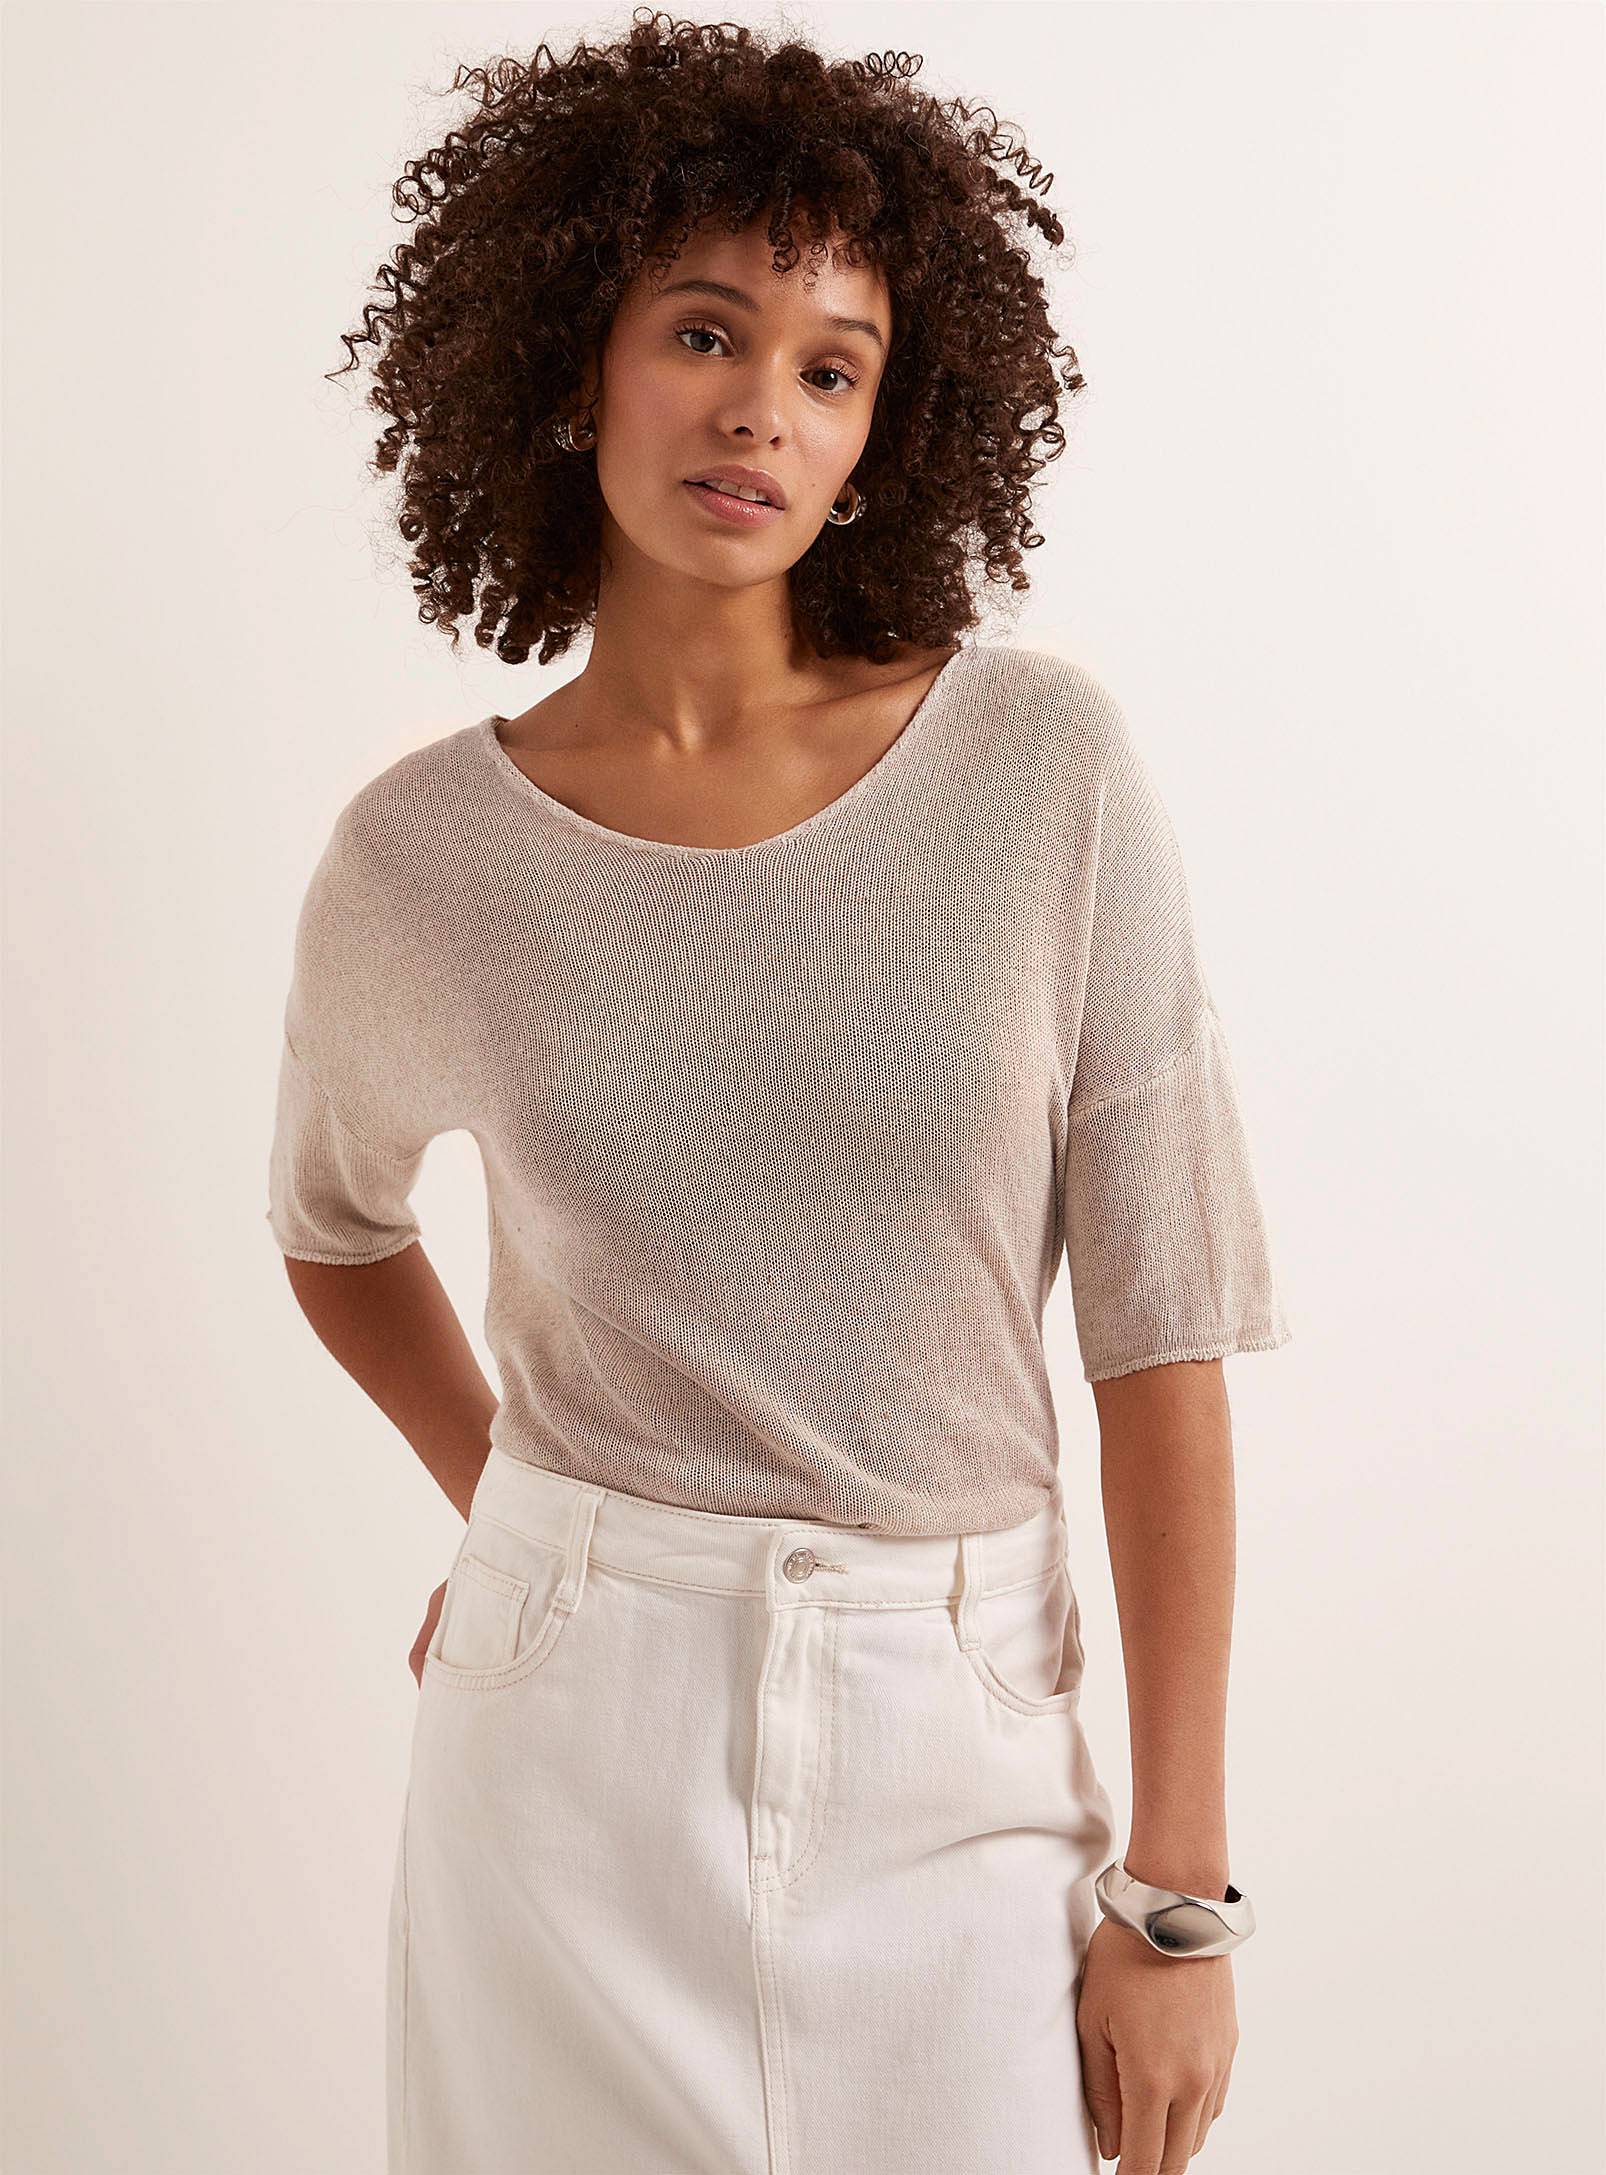 Contemporaine Loose And Flowy V-neck Sweater In Ecru/linen